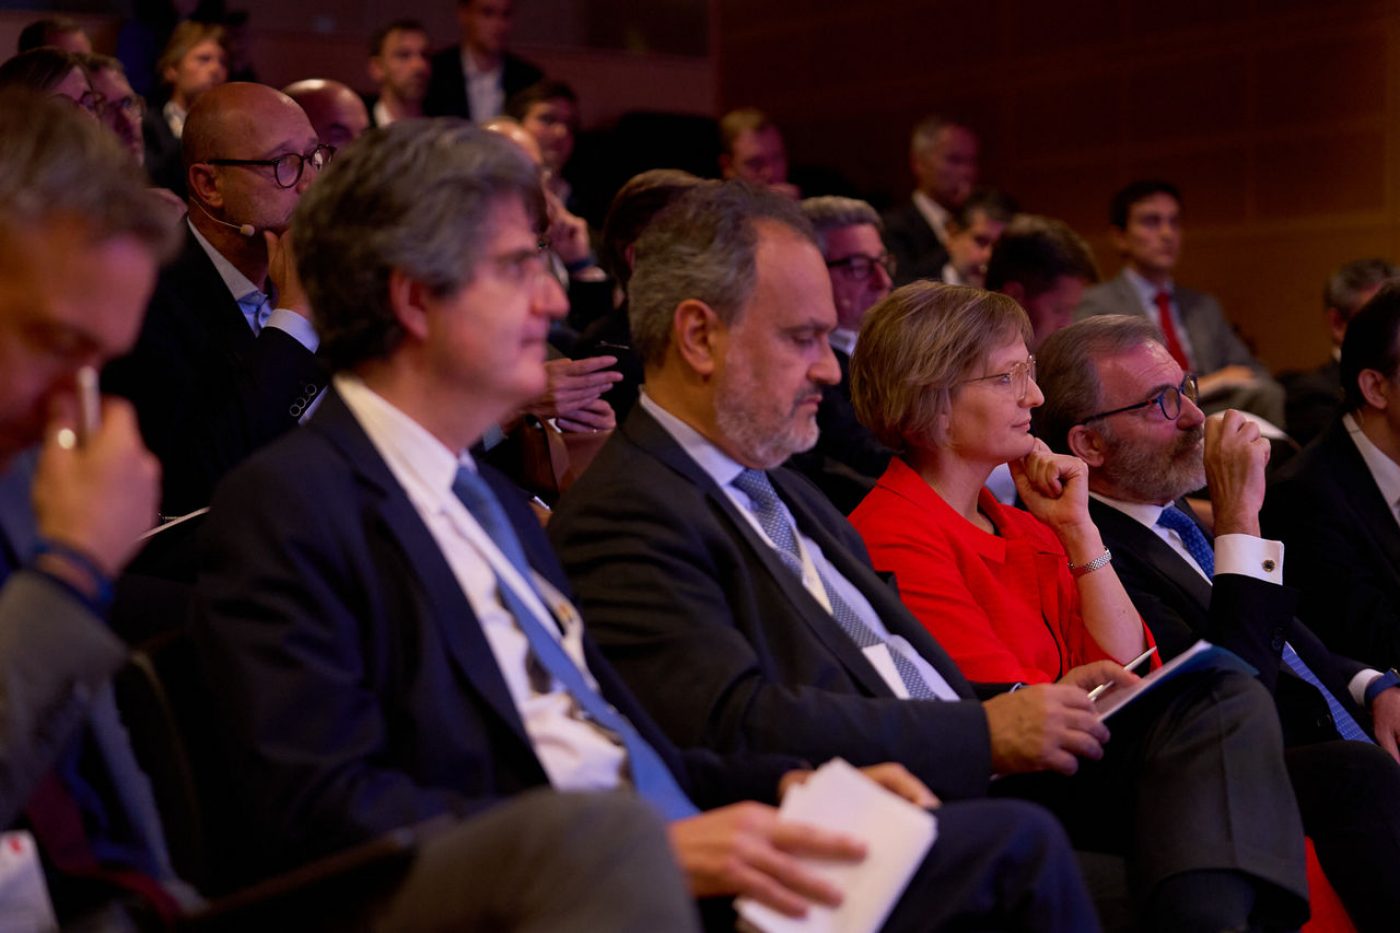 Audience at the H2Med event in Berlin